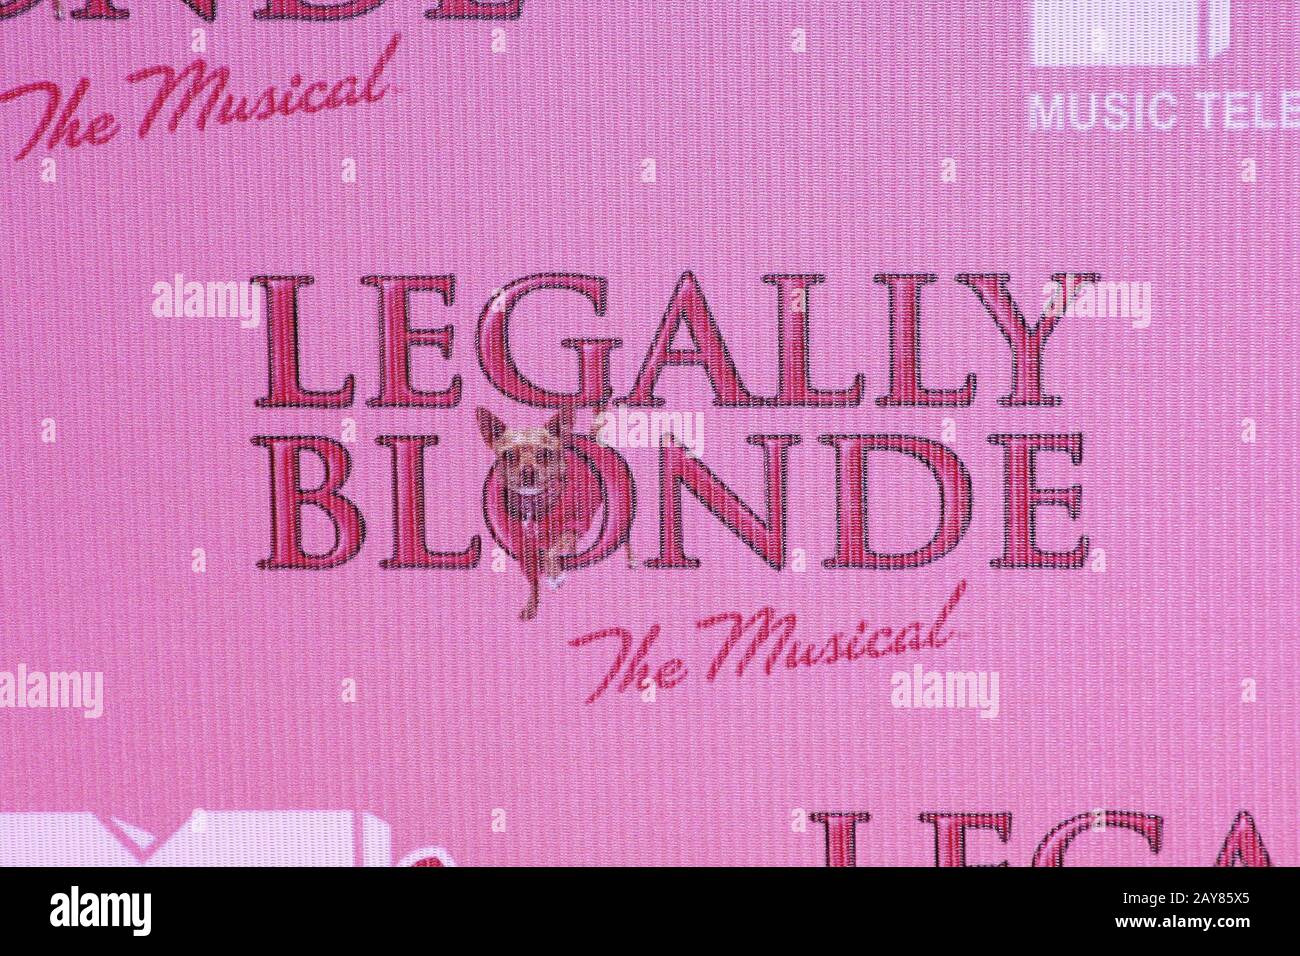 New York, NY, USA. 18 September, 2007. Atmosphere at the taping of Legally Blonde The Musical at The Palace Theatre. Credit: Steve Mack/Alamy Stock Photo